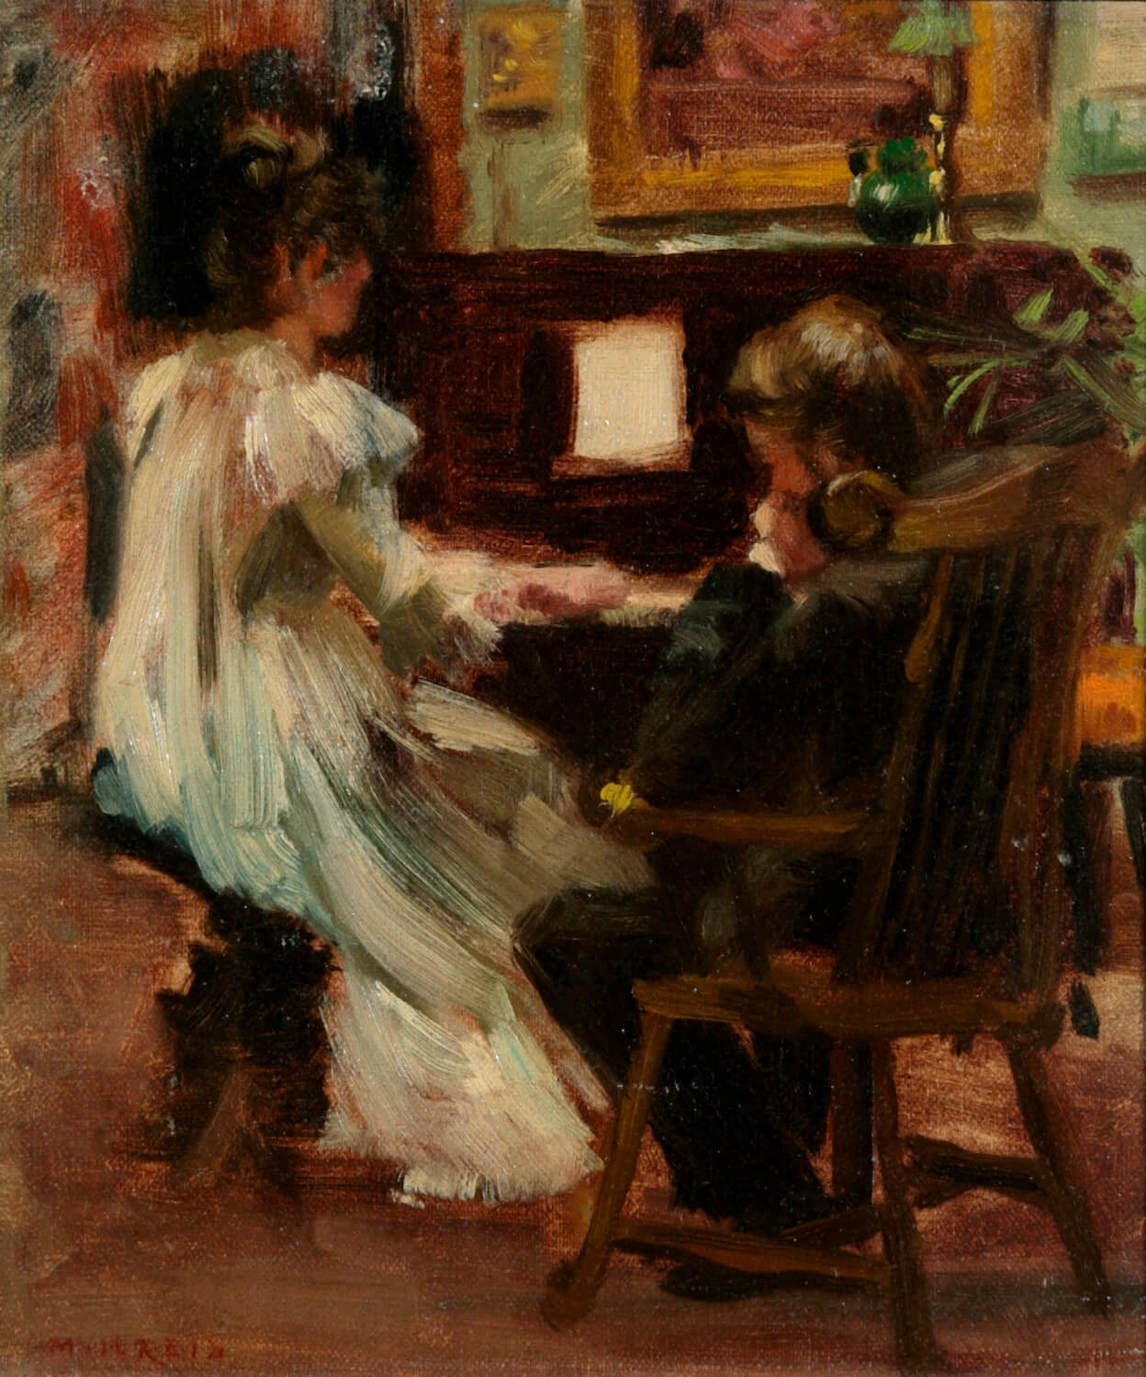 Mary Hiester Reid, Study for “An Idle Hour,” c.1896